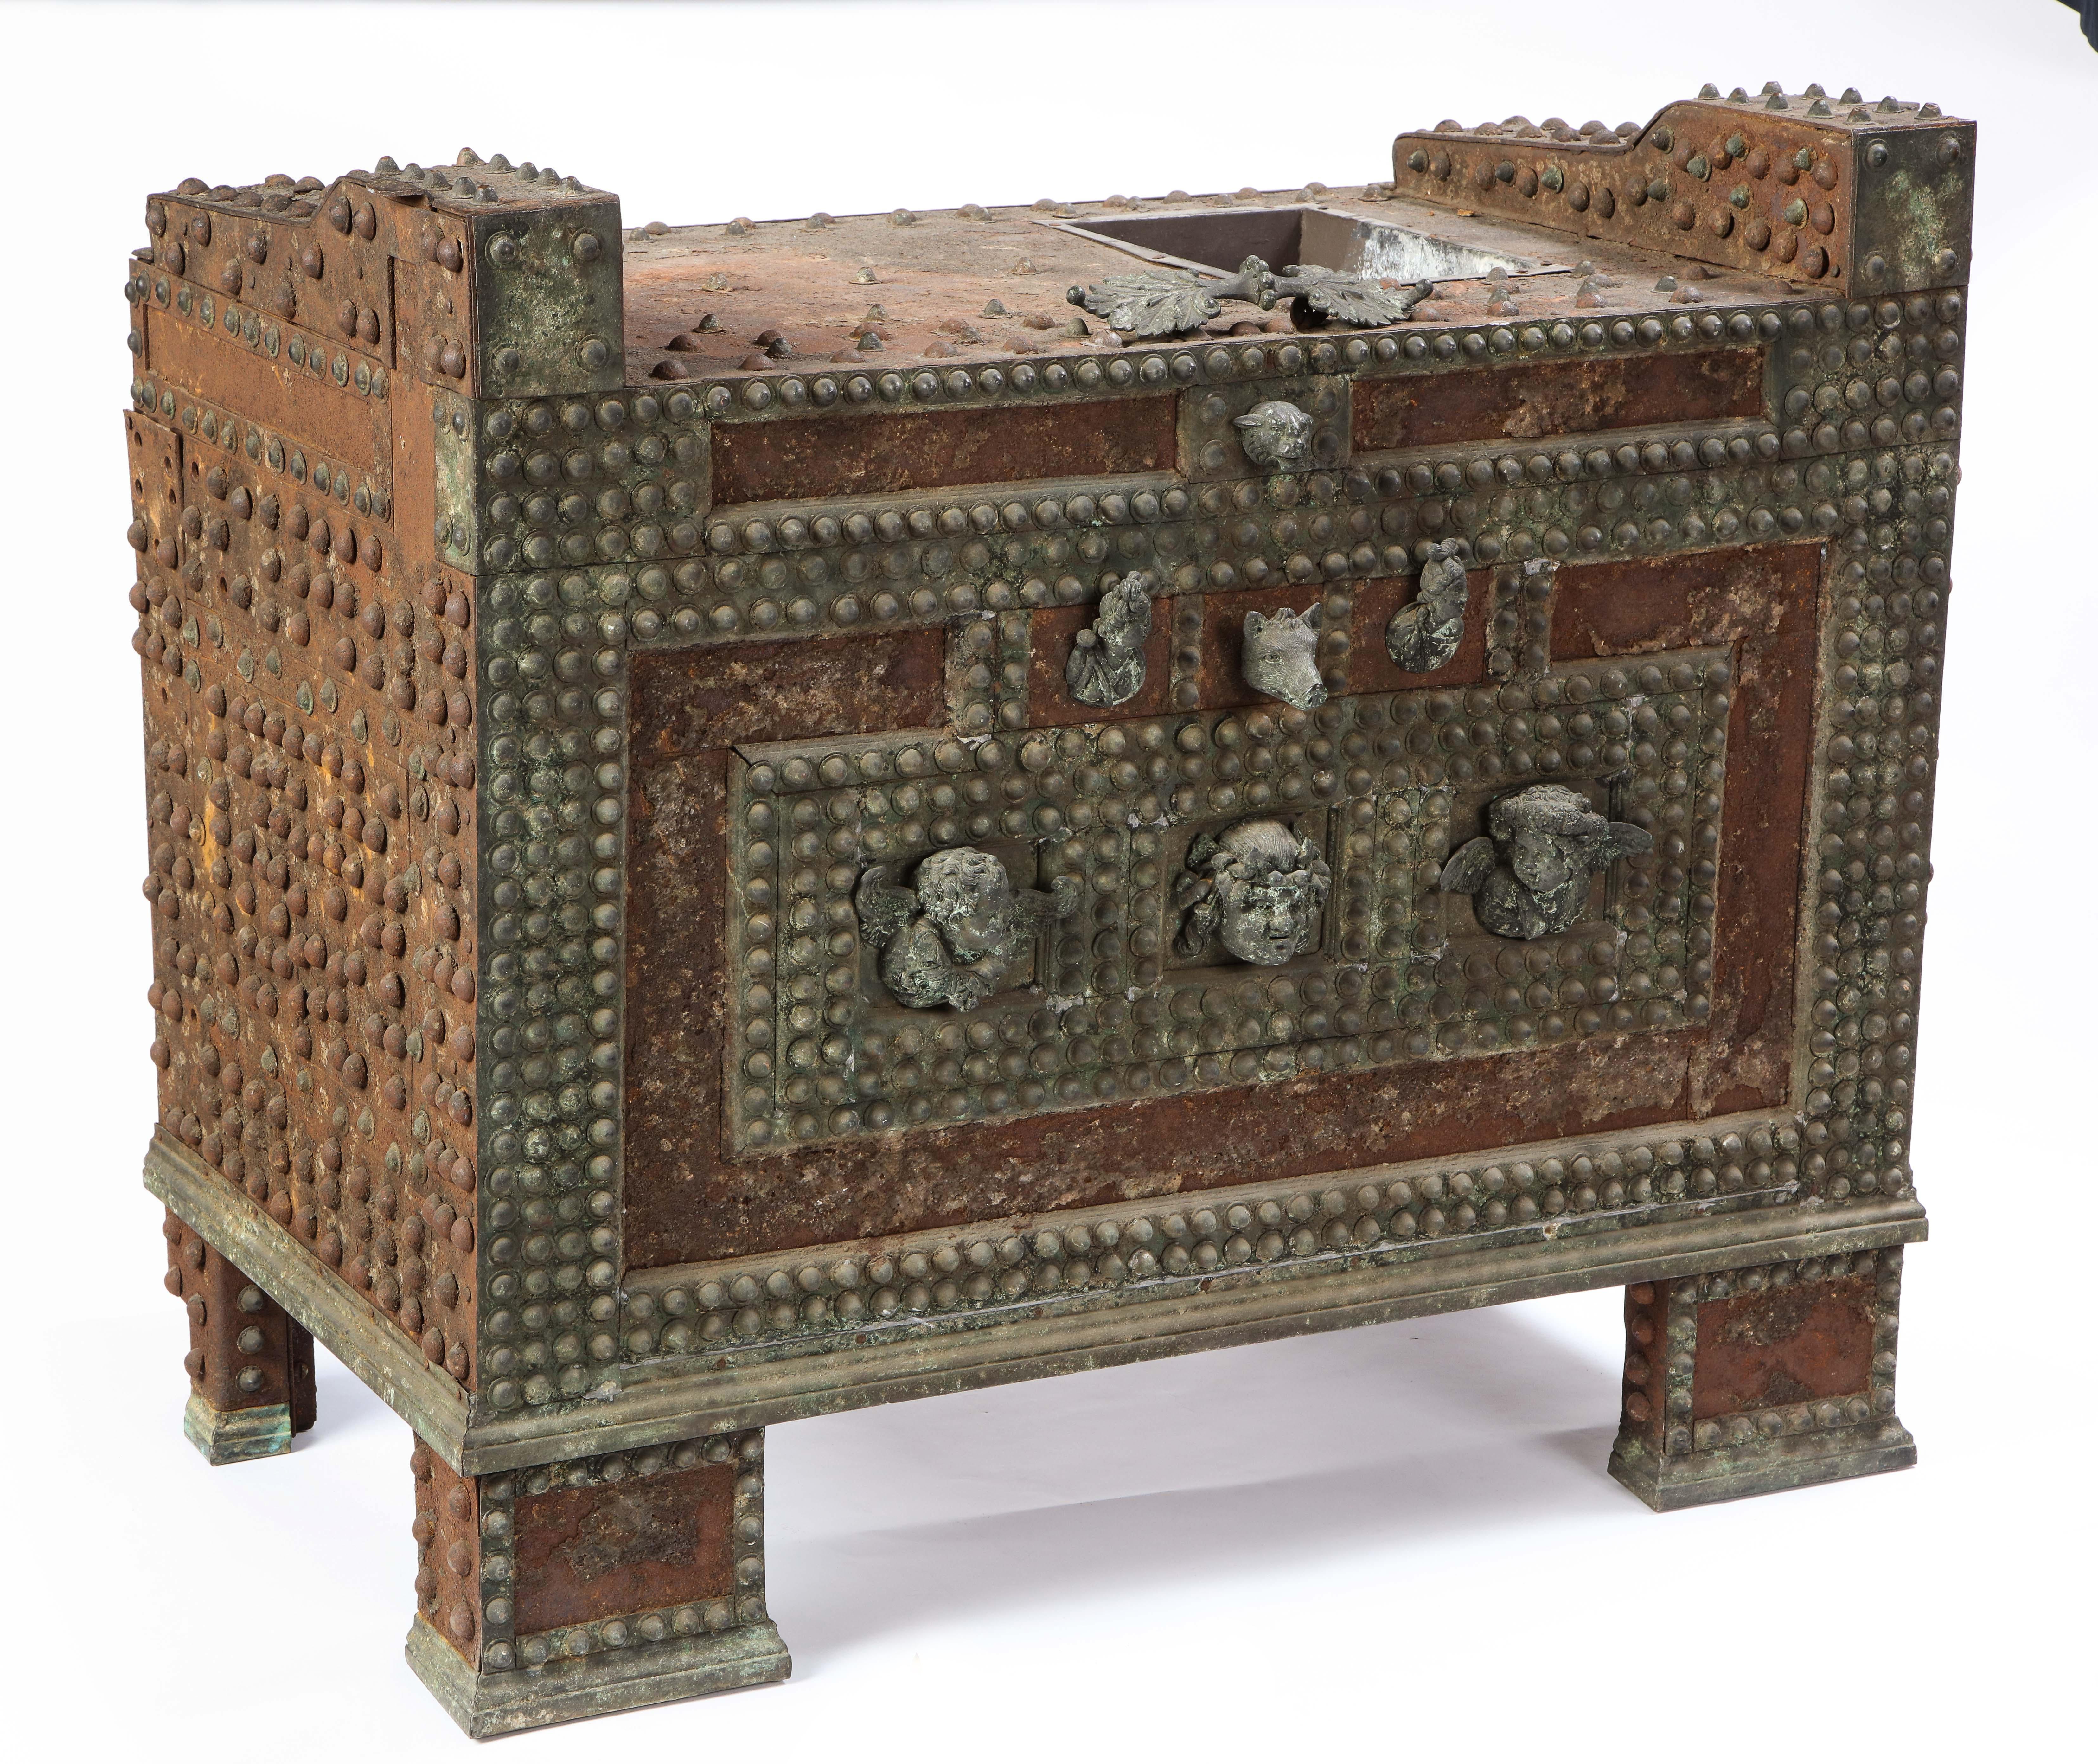 A 20th century patinated-bronze model of a safe based on an example from Pompeii . Said to be originally from the Andrew Carnegie collection, this is a truly distinct piece that can serve as an accent to any room. The small and intricate details